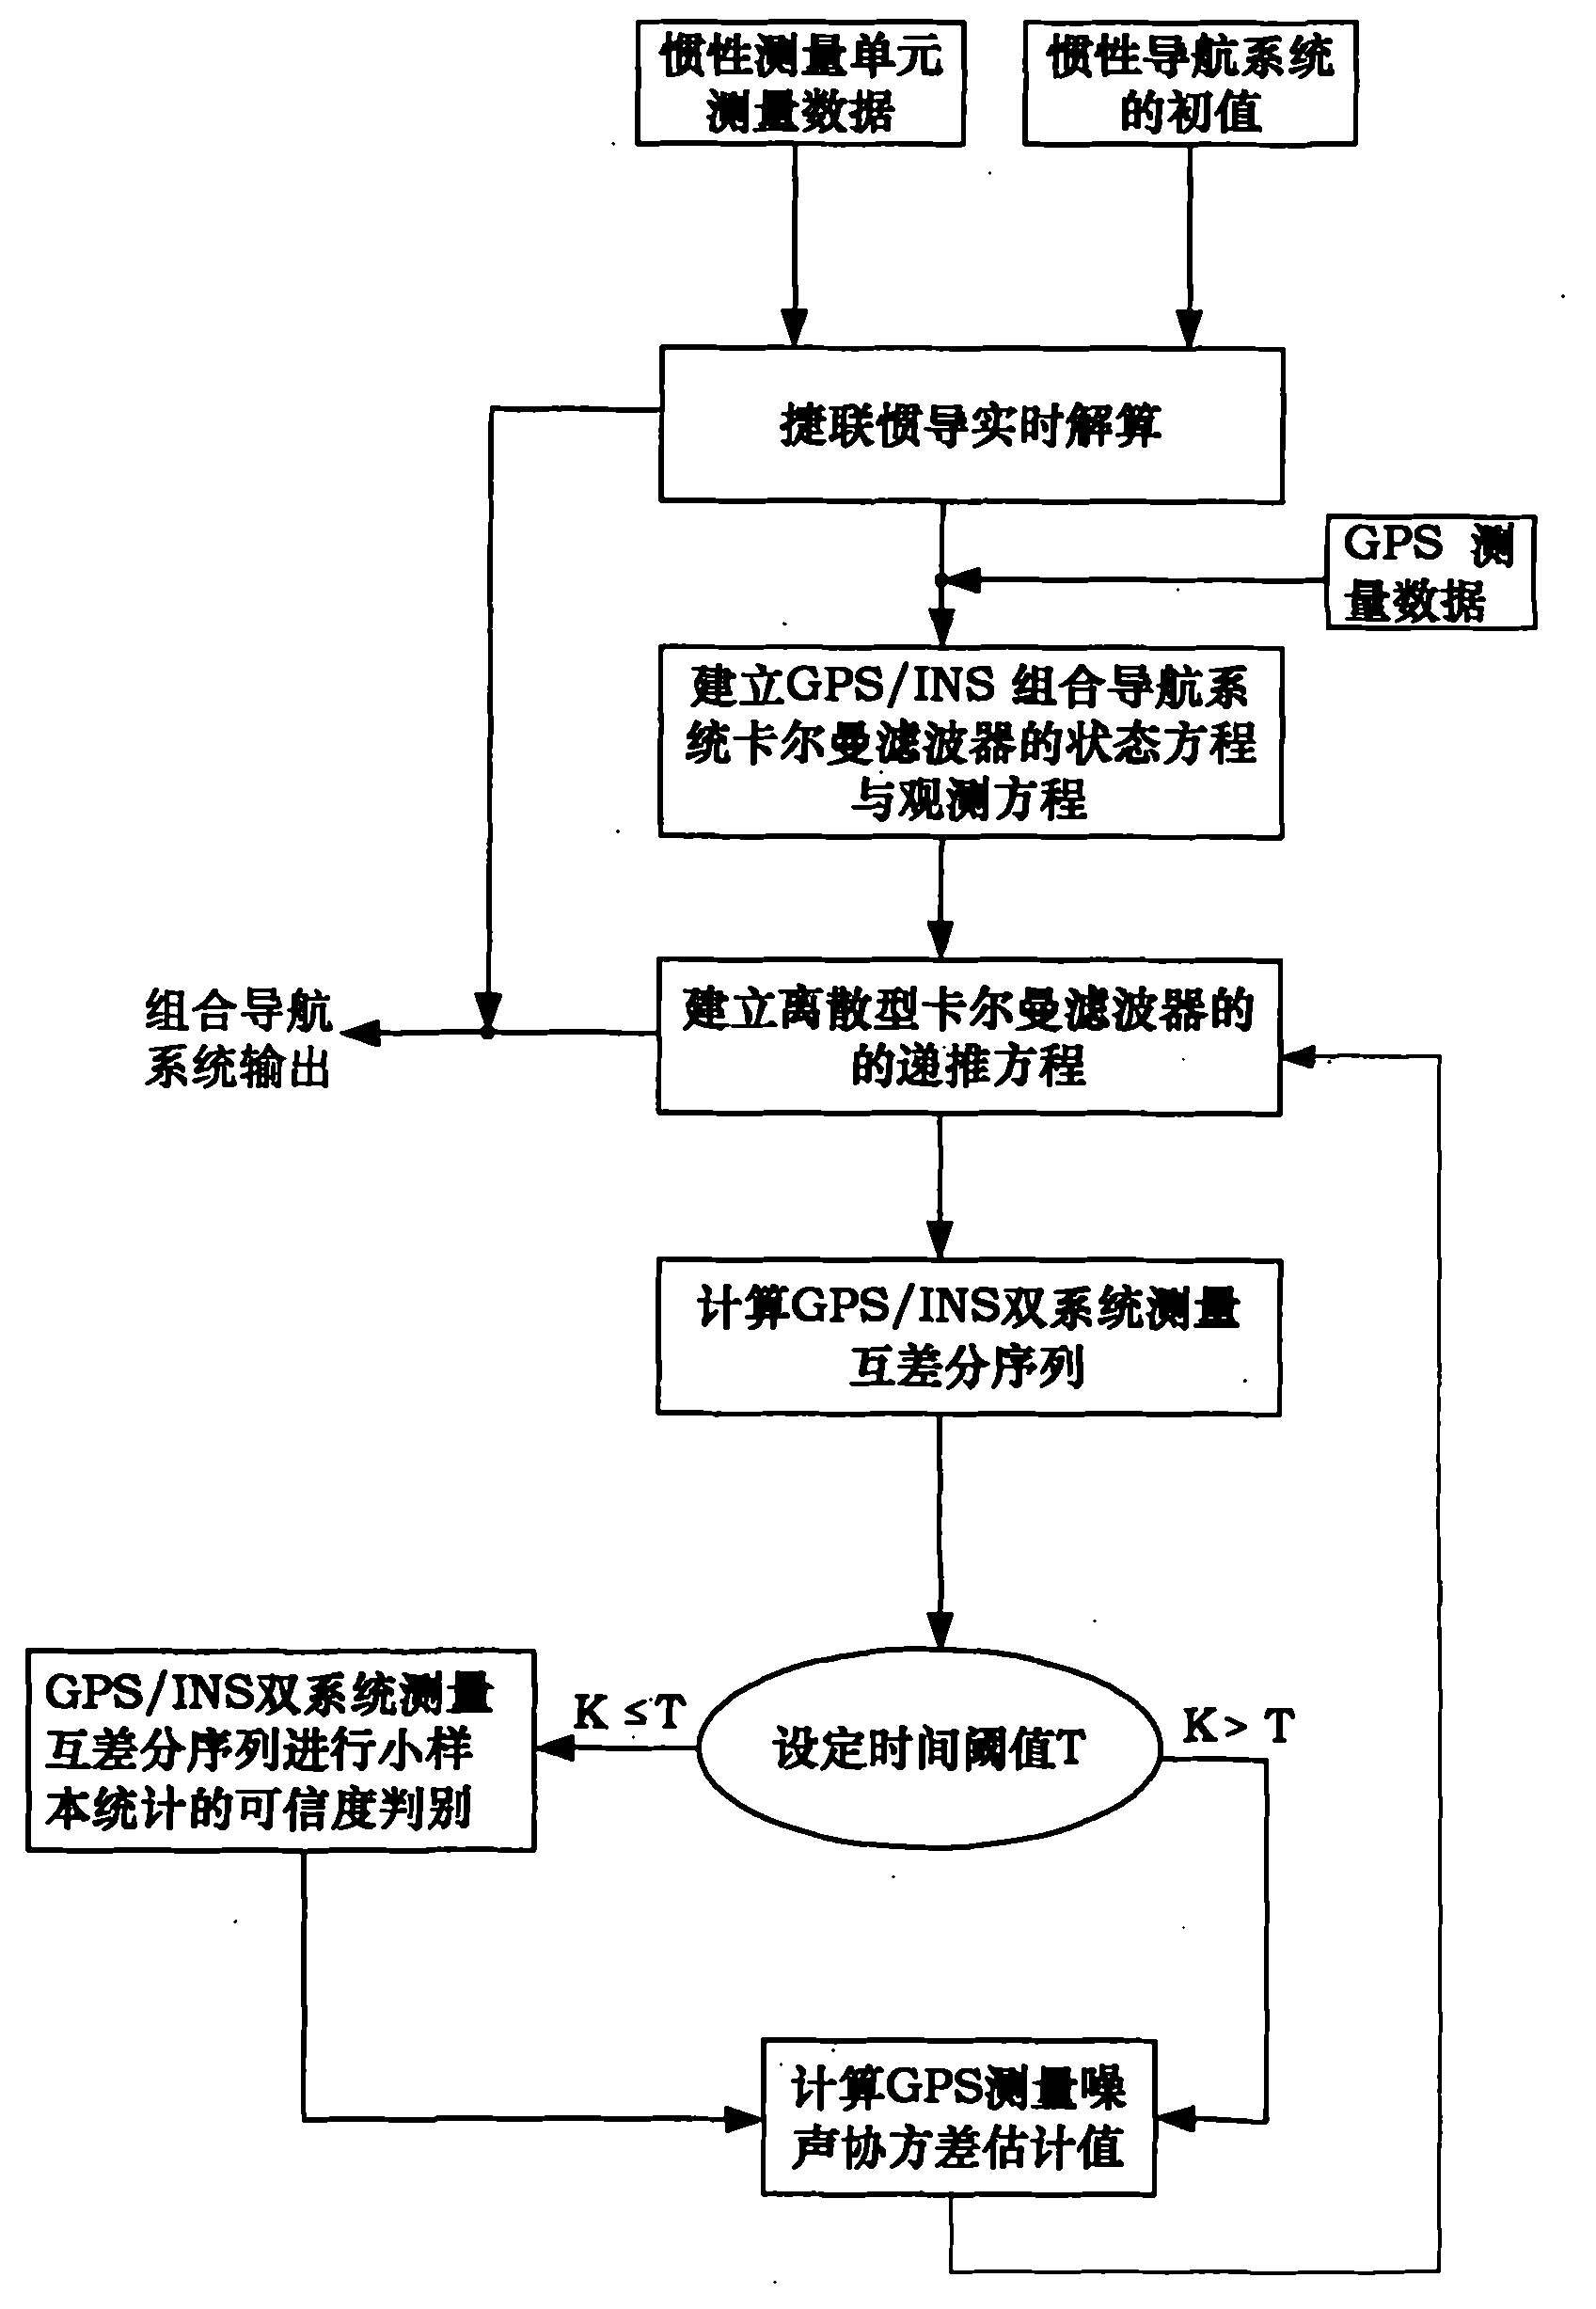 Self-adaptive filtering method based on different measuring characteristics of GPS (Global Positioning System)/INS (Inertial Navigation System) integrated navigation system